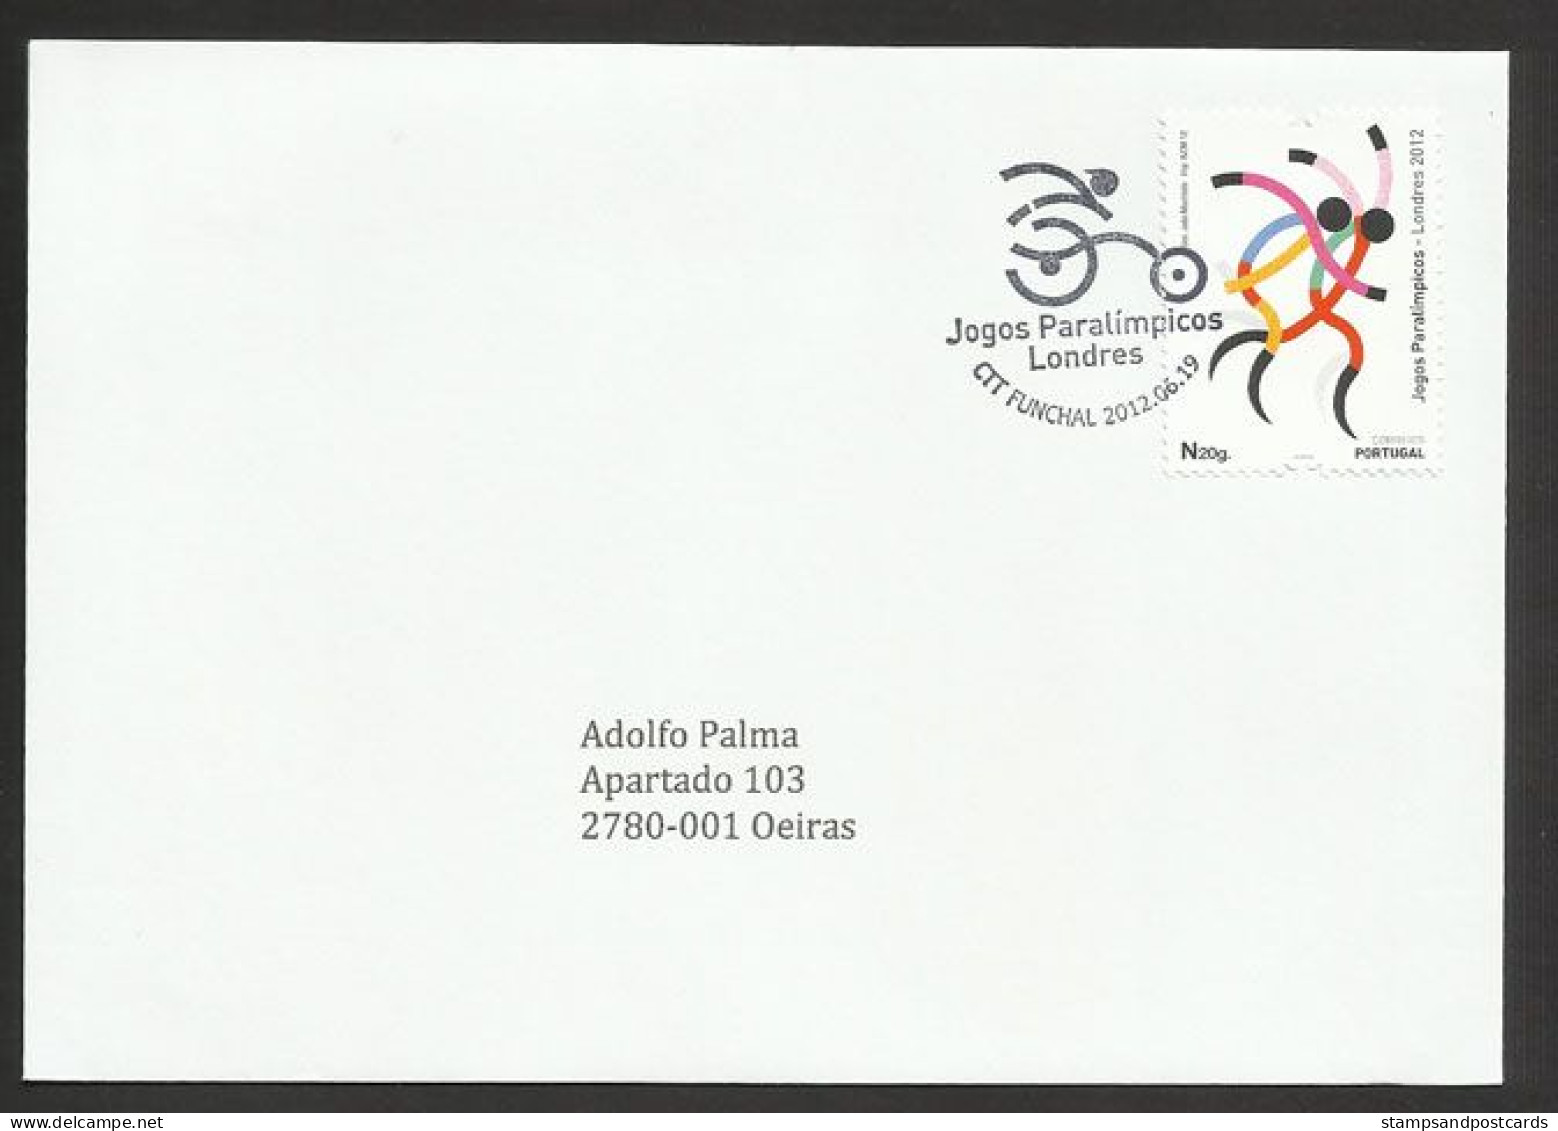 Portugal Jeux Paralympiques London 2012 FDC Cachet Madère Paralympic Games FDC Madeira Postmark - Summer 2012: London